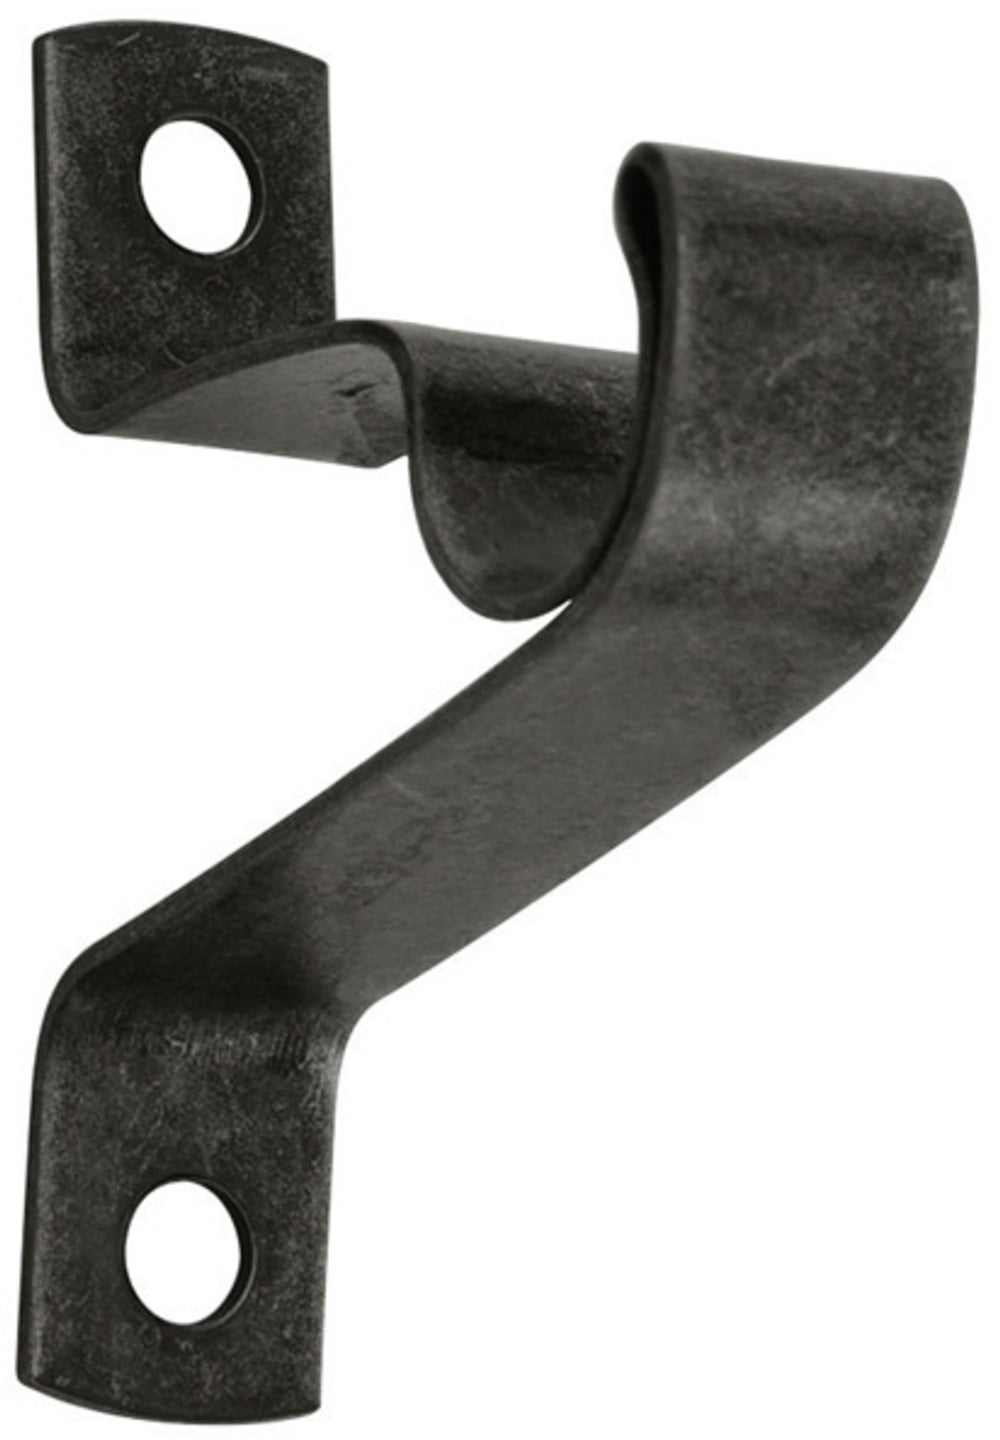 buy rod brackets & closet at cheap rate in bulk. wholesale & retail home hardware repair tools store. home décor ideas, maintenance, repair replacement parts